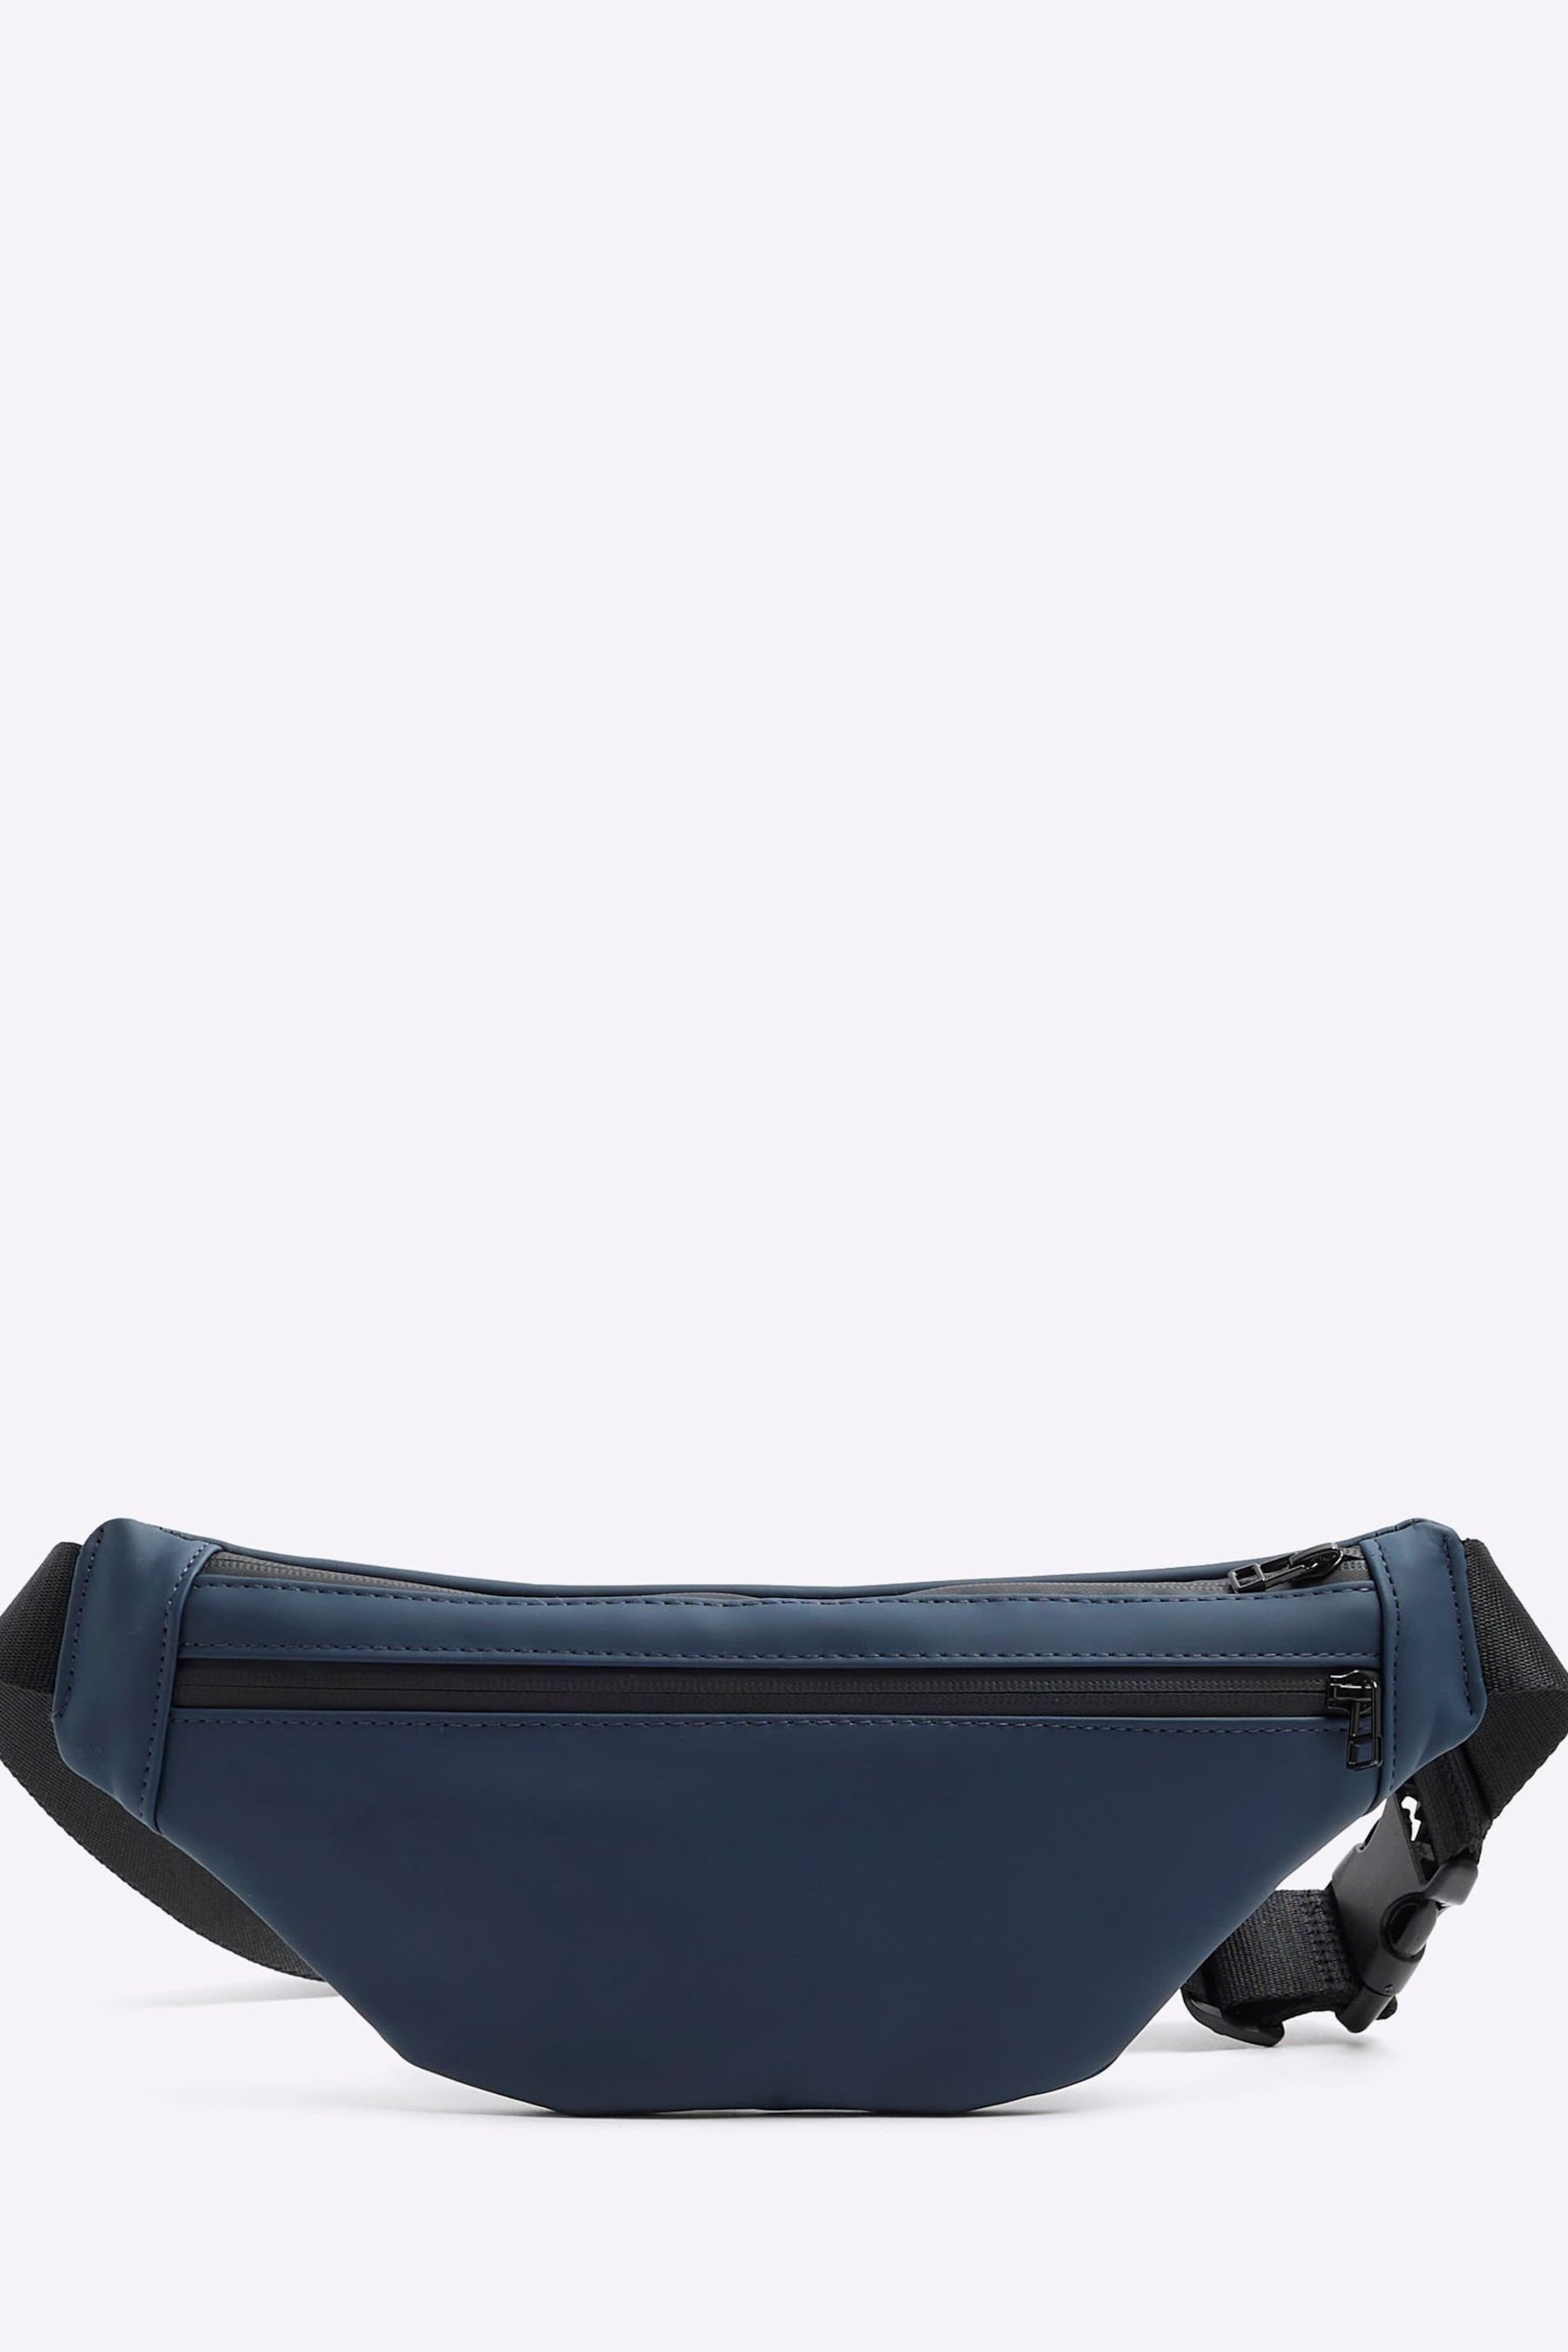 River Island Blue Rubberised Small Bumbag - Image 1 of 8